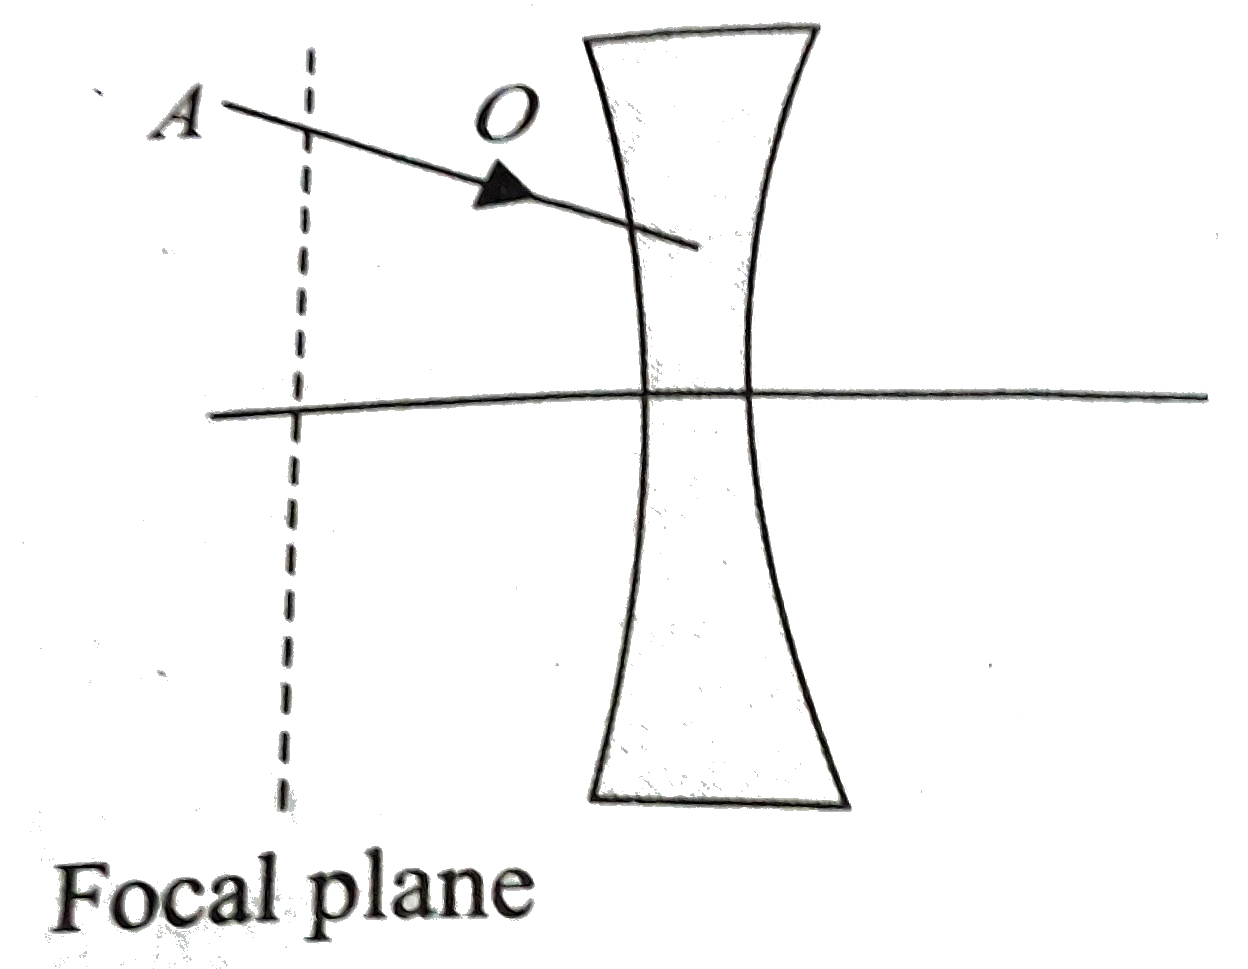 Diverging Lens Diagram A Ray Of Light Ao Is Incident On A Diverging Lens As Shown In Figure